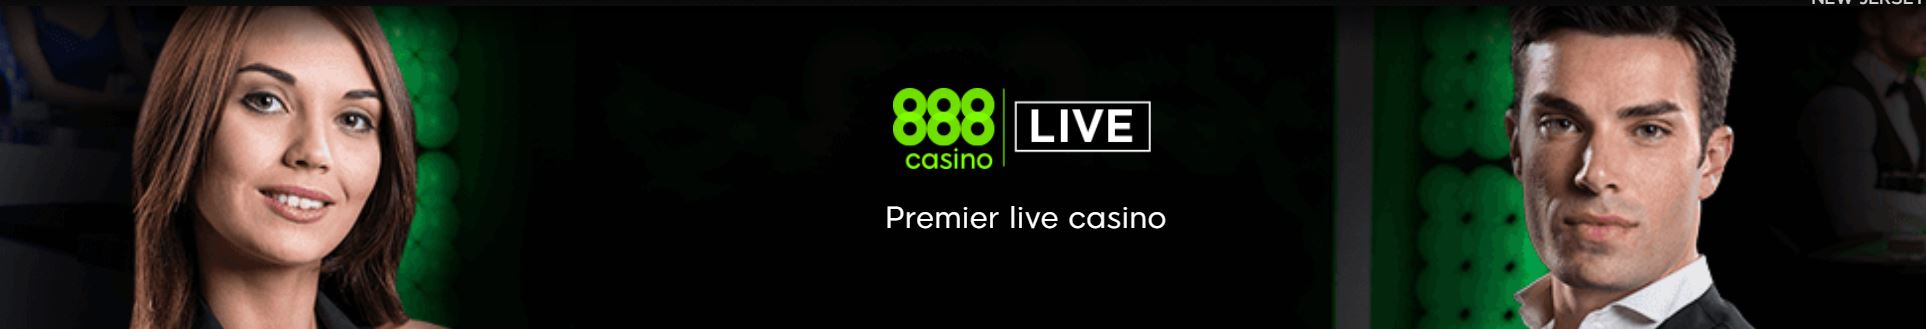 888 Casino offers various types of casino games